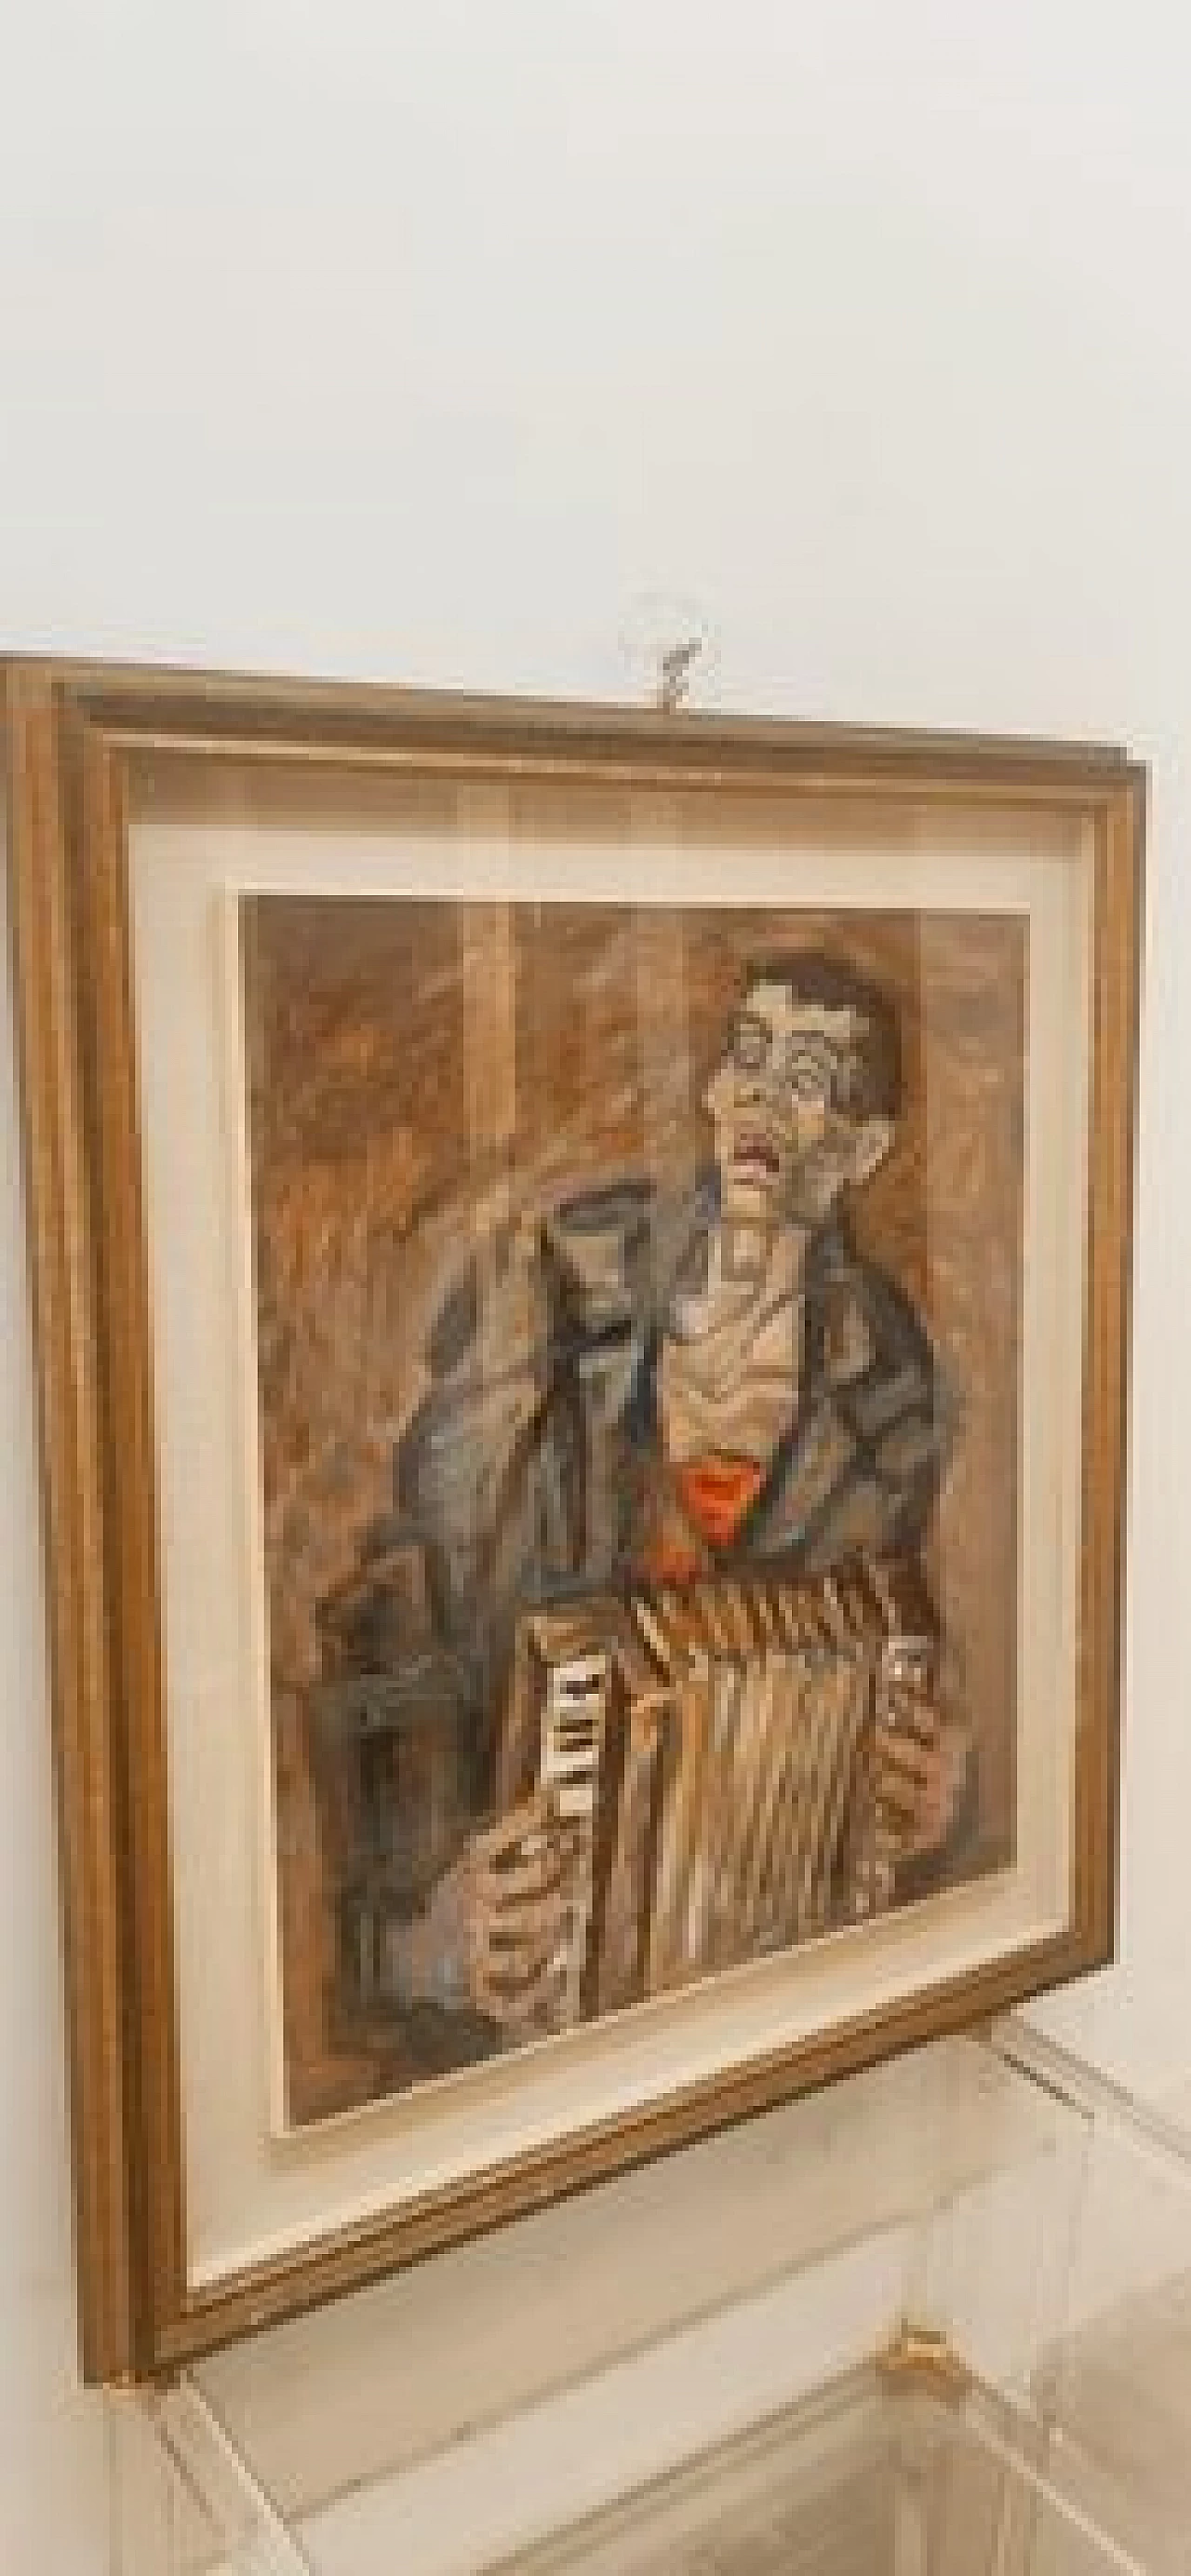 Emilio Notte, The blind musician, oil painting on canvas, 1970s 3